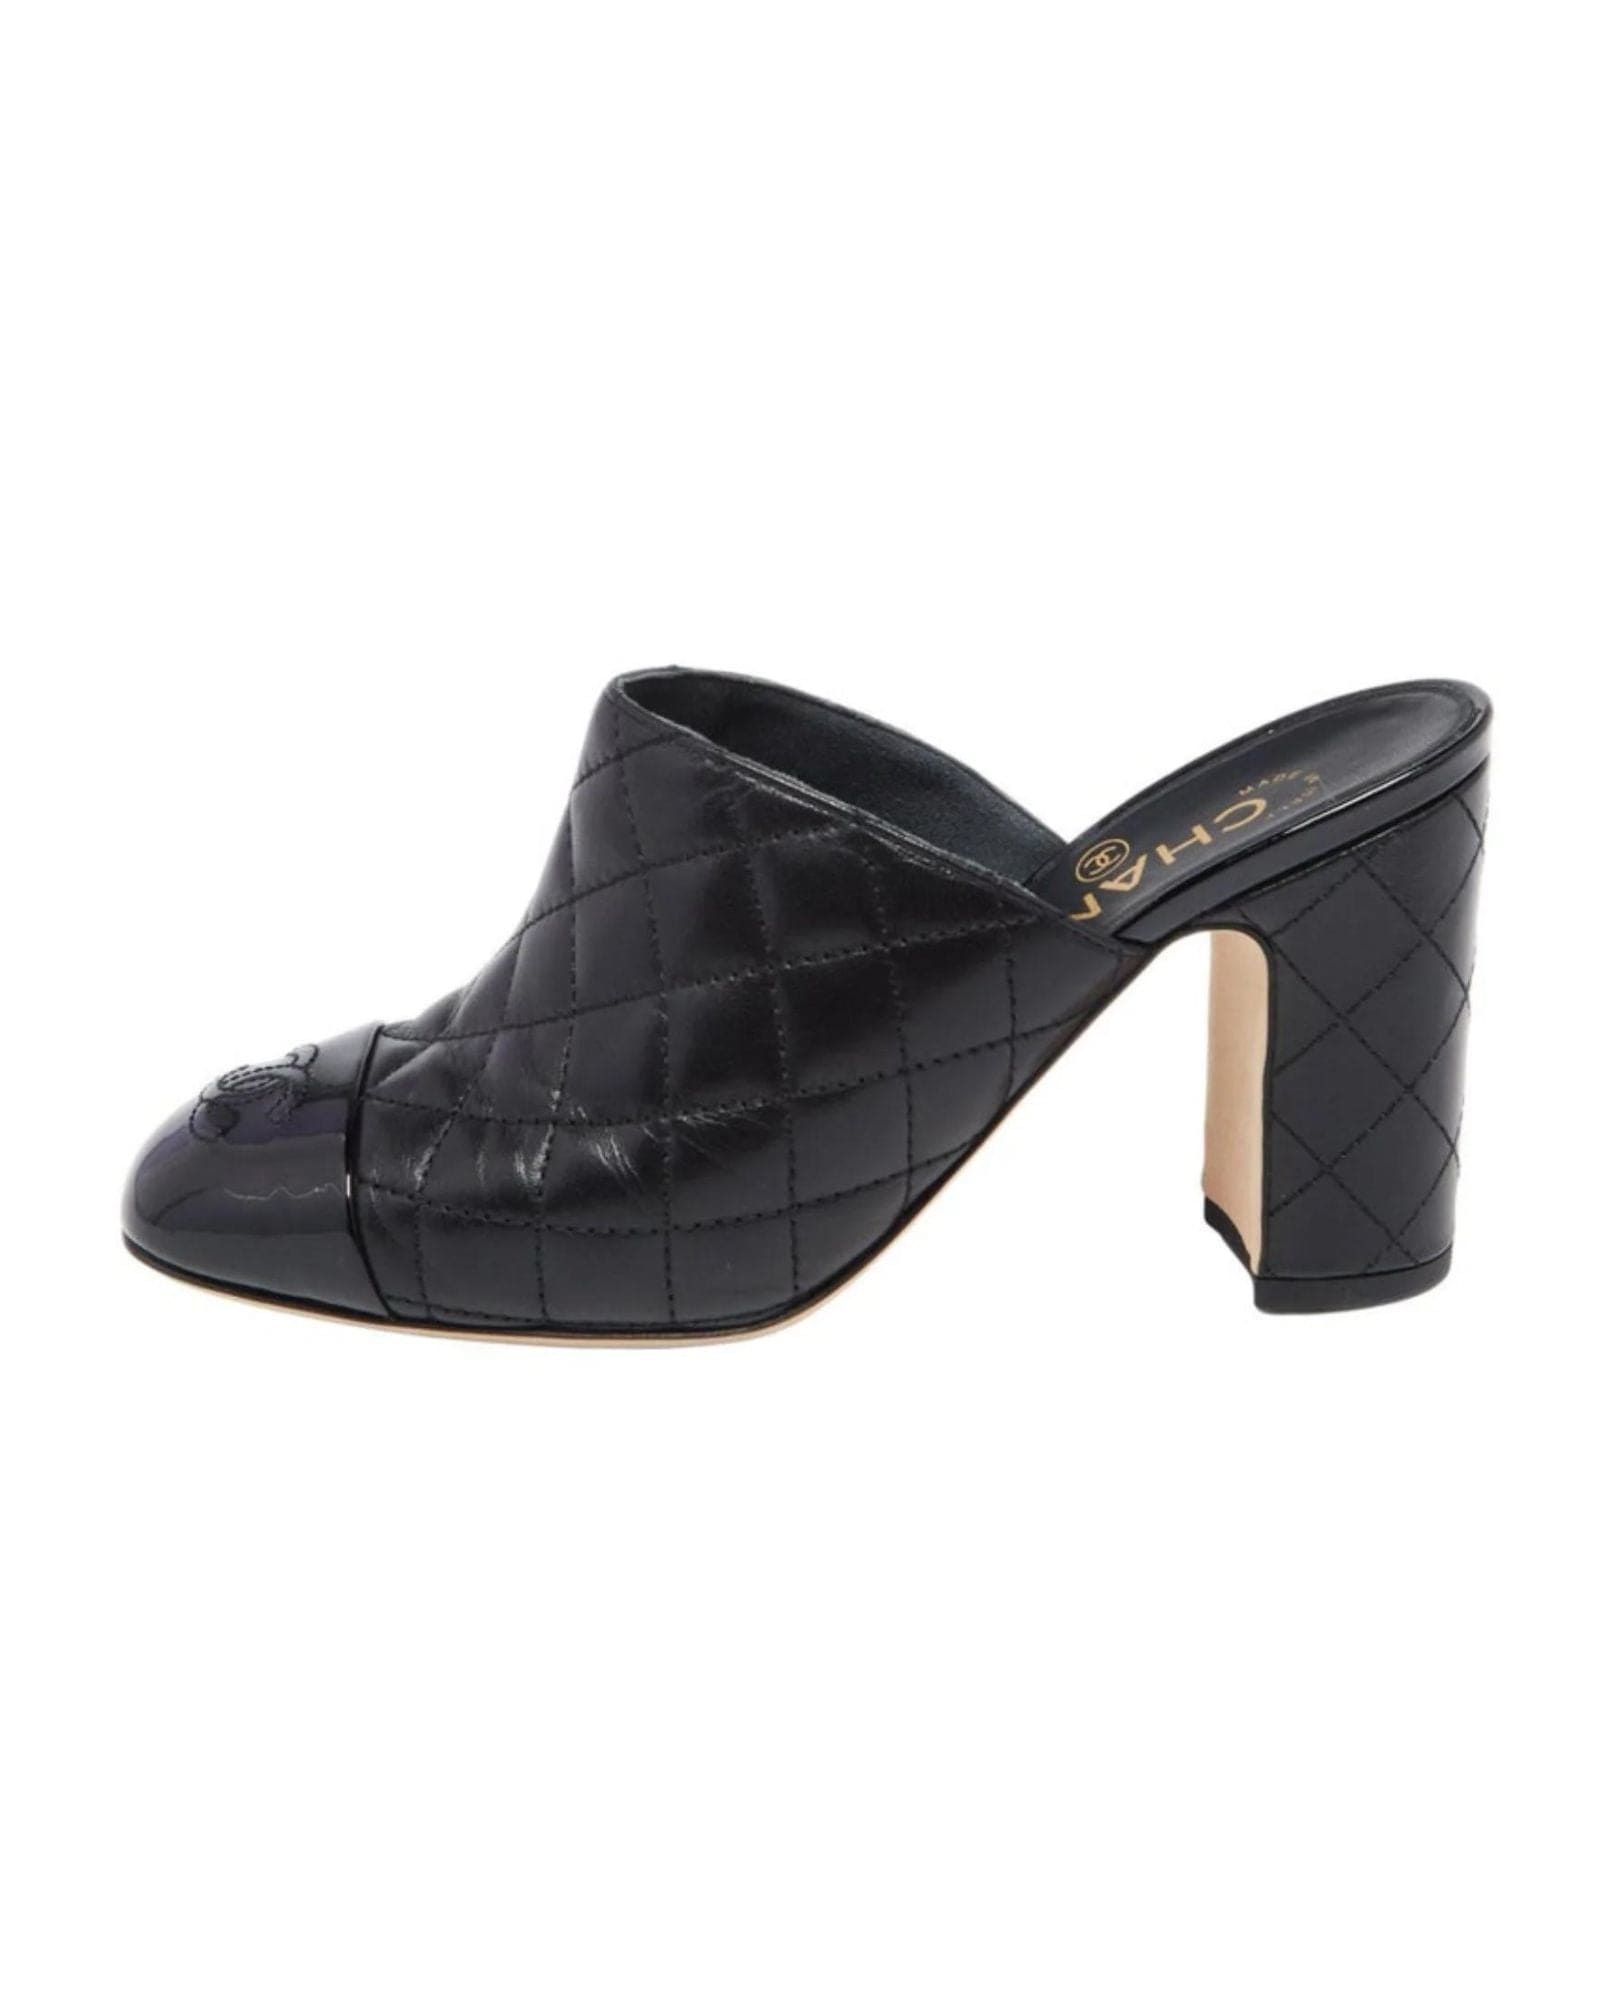 CHANEL Black Quilted Kitten Heels 37 - More Than You Can Imagine